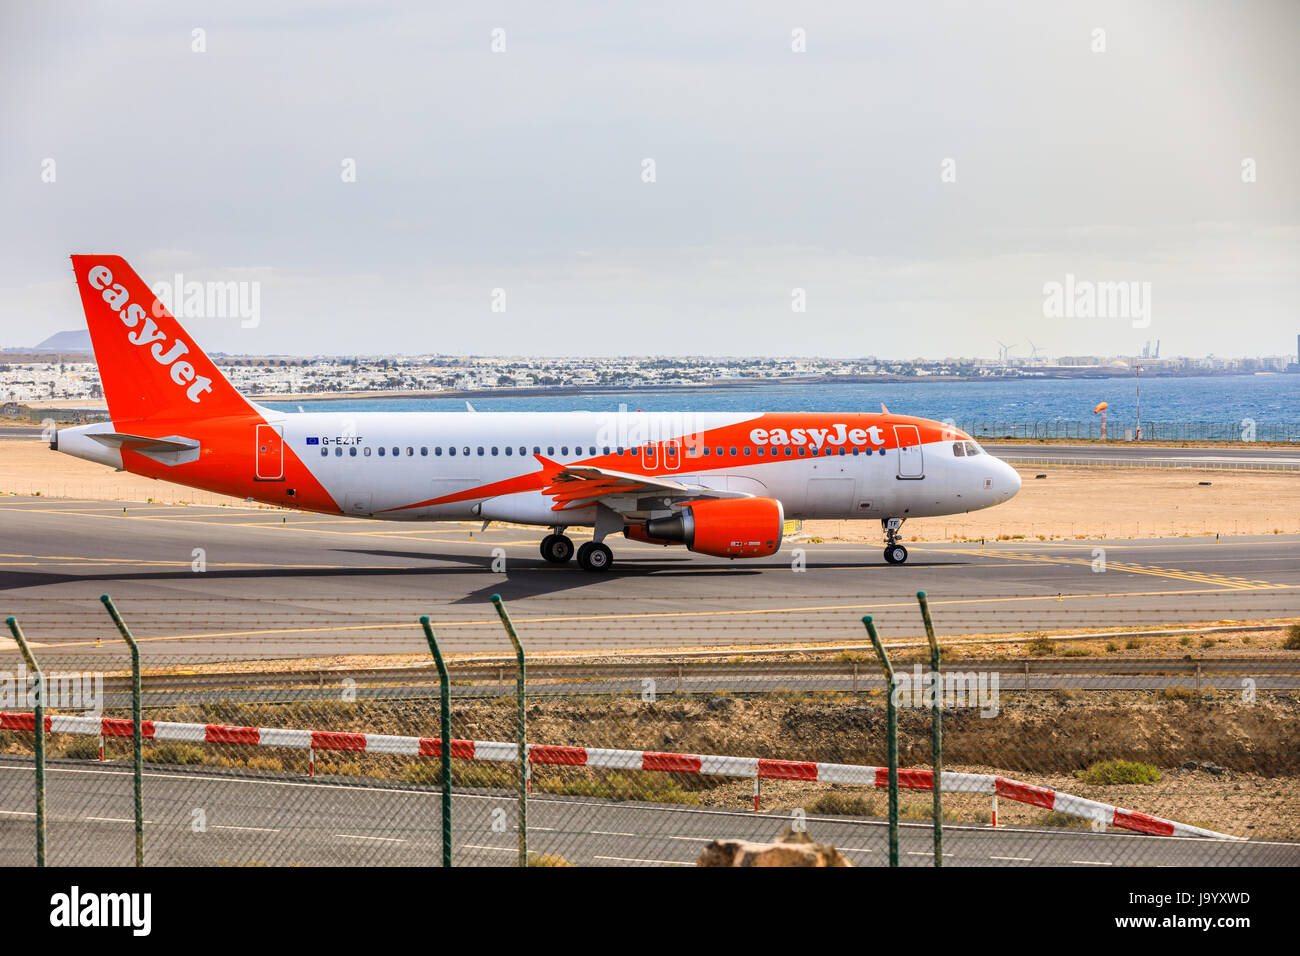 ARECIFE, SPAIN - APRIL, 15 2017: AirBus A319-100 of easyjet ready to take off at Lanzarote Airport Stock Photo